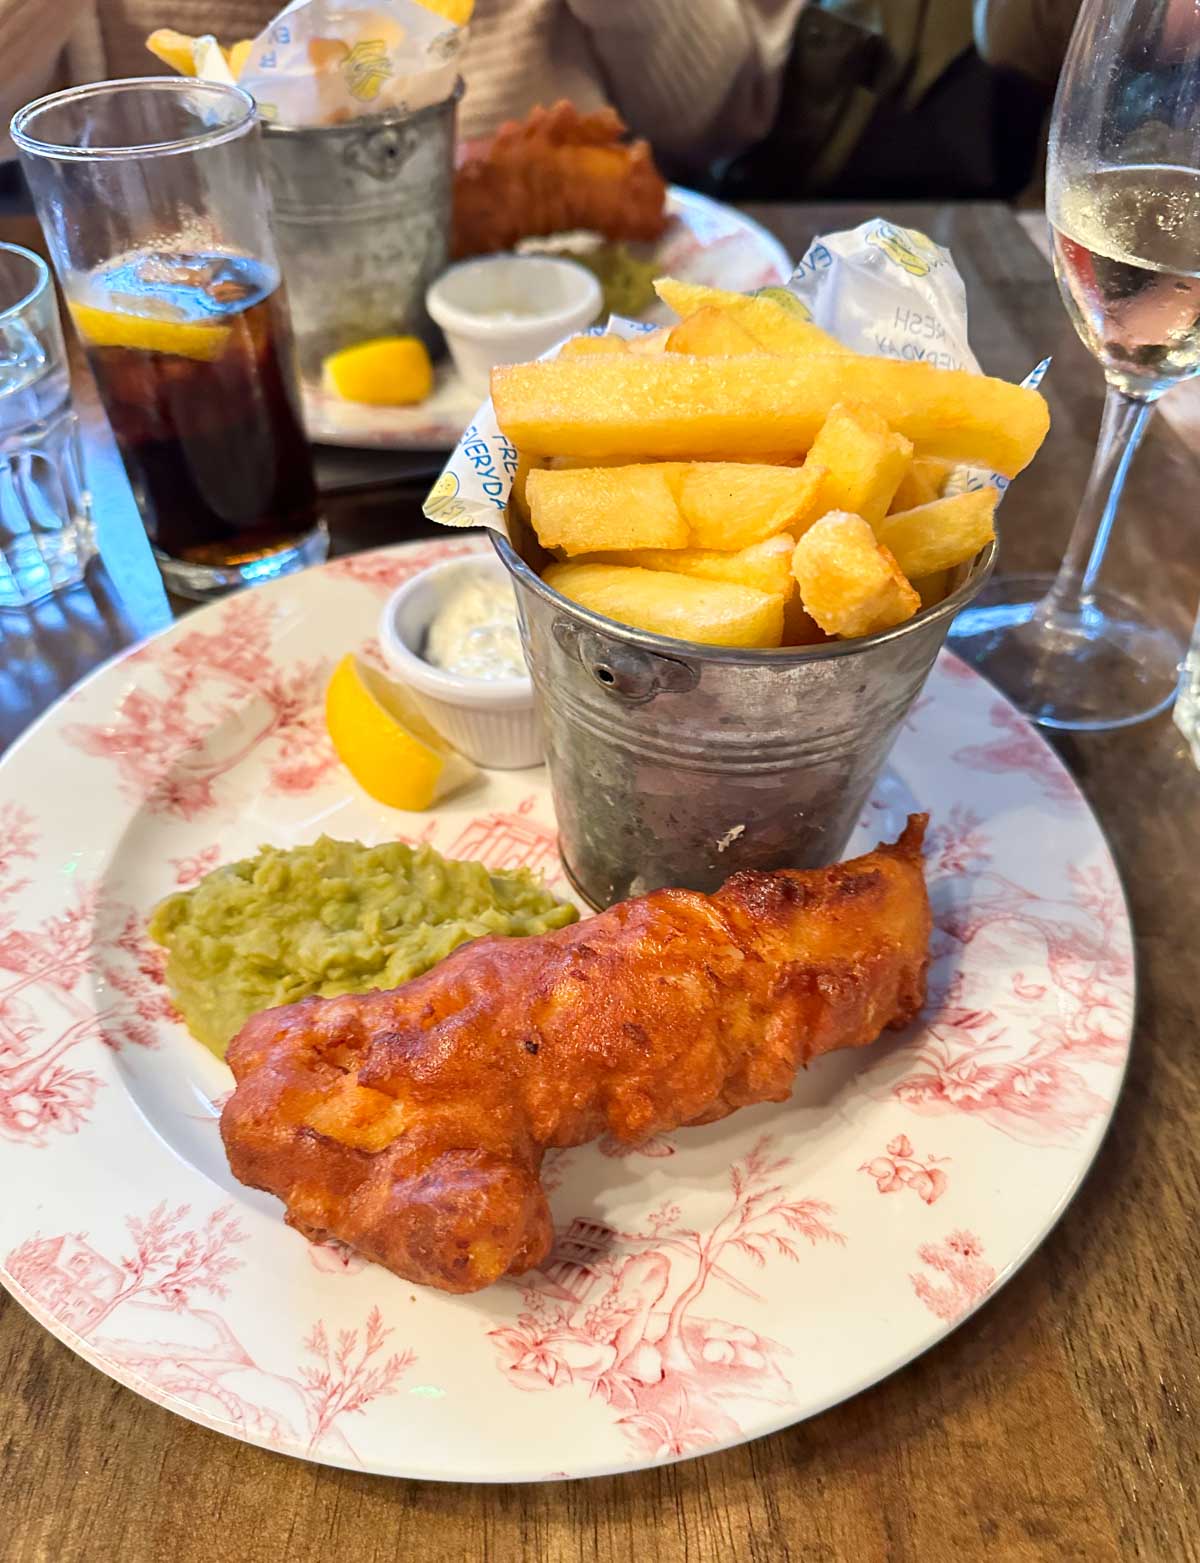 A plate has a piece of fried fish next to mushy peas and a container of chips/french fries.